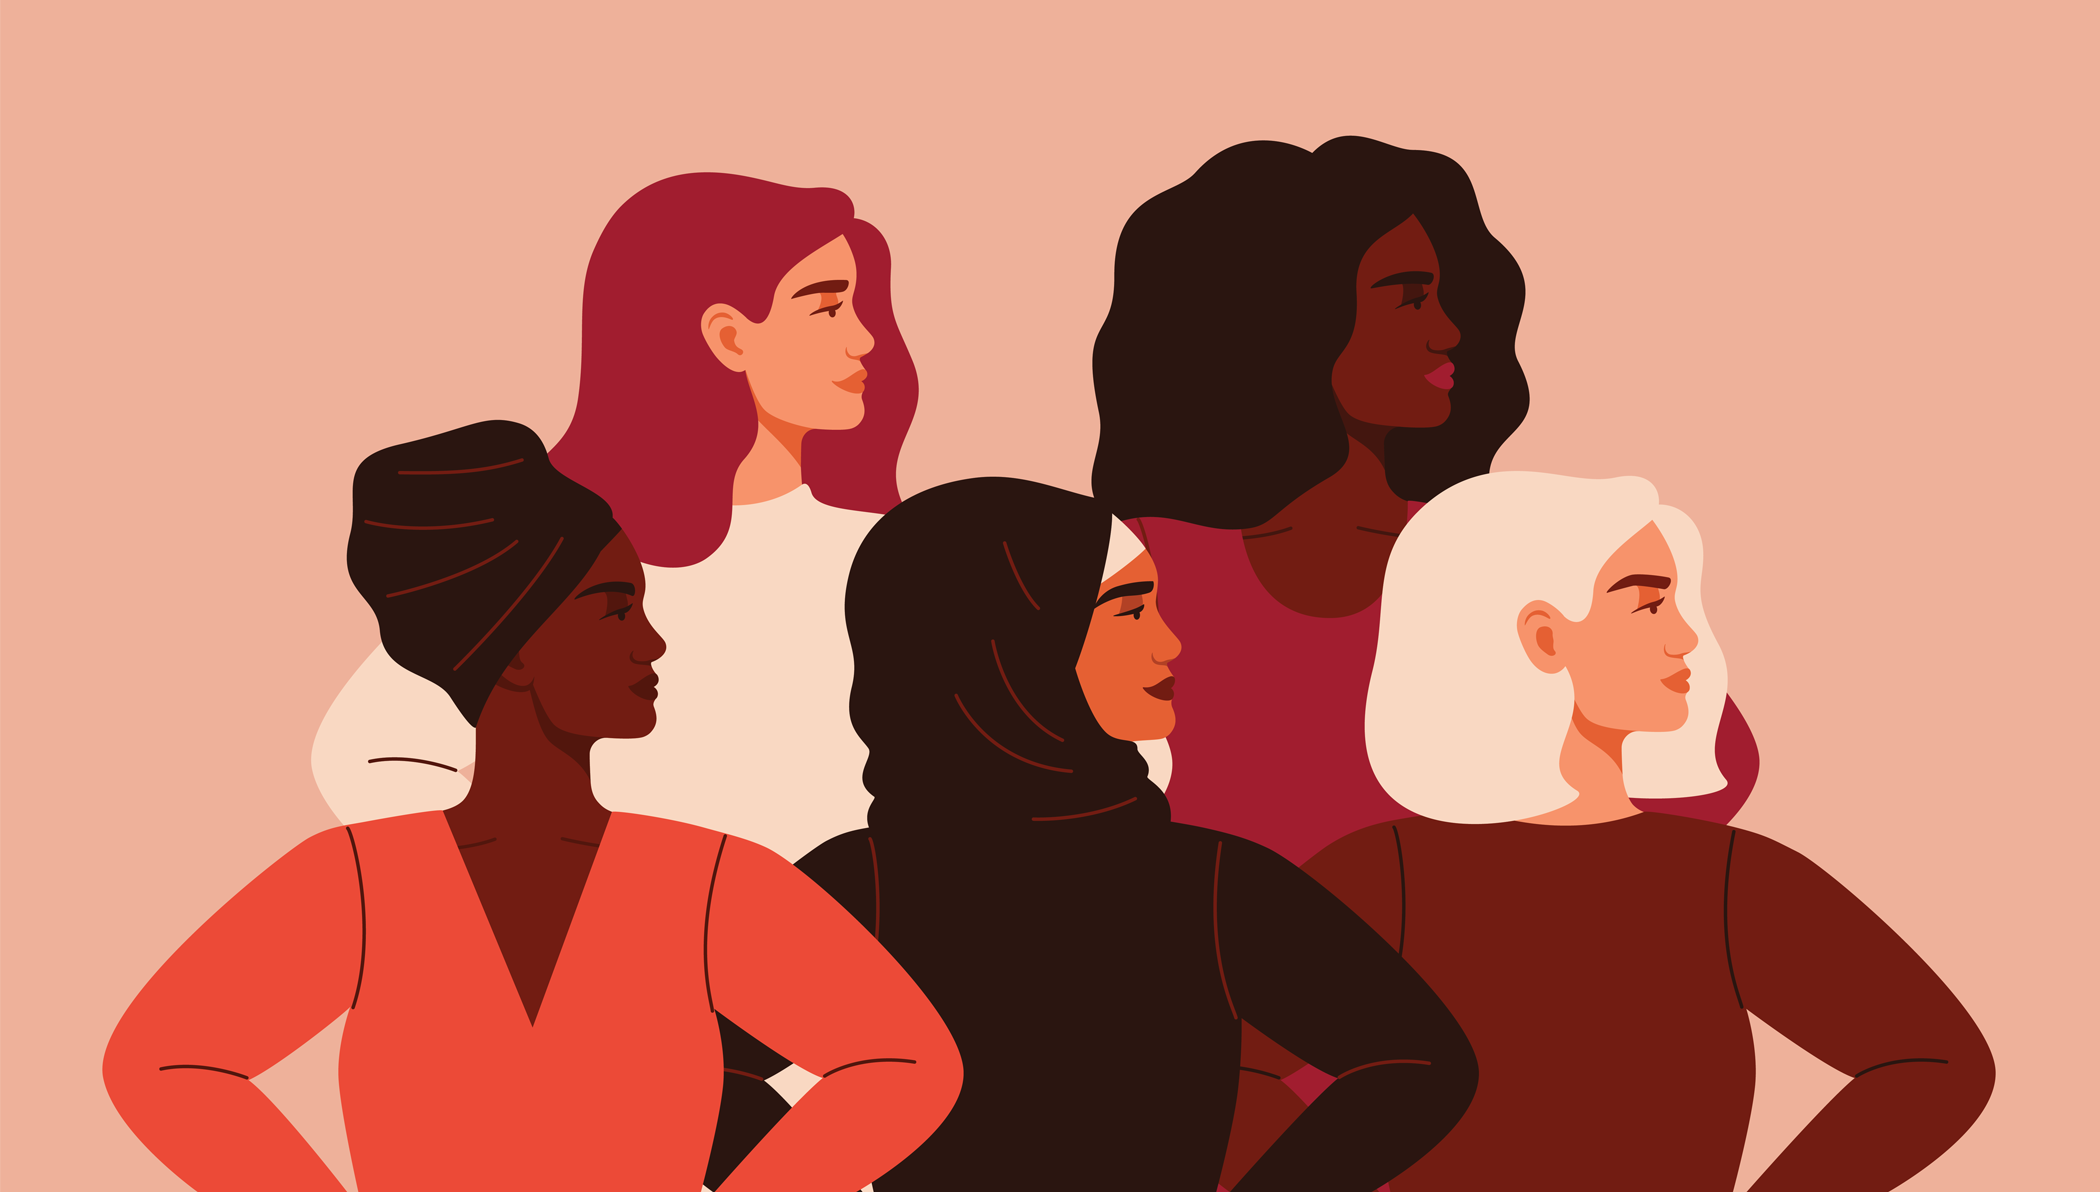 Five women of different nationalities illustration, standing together looking to the right